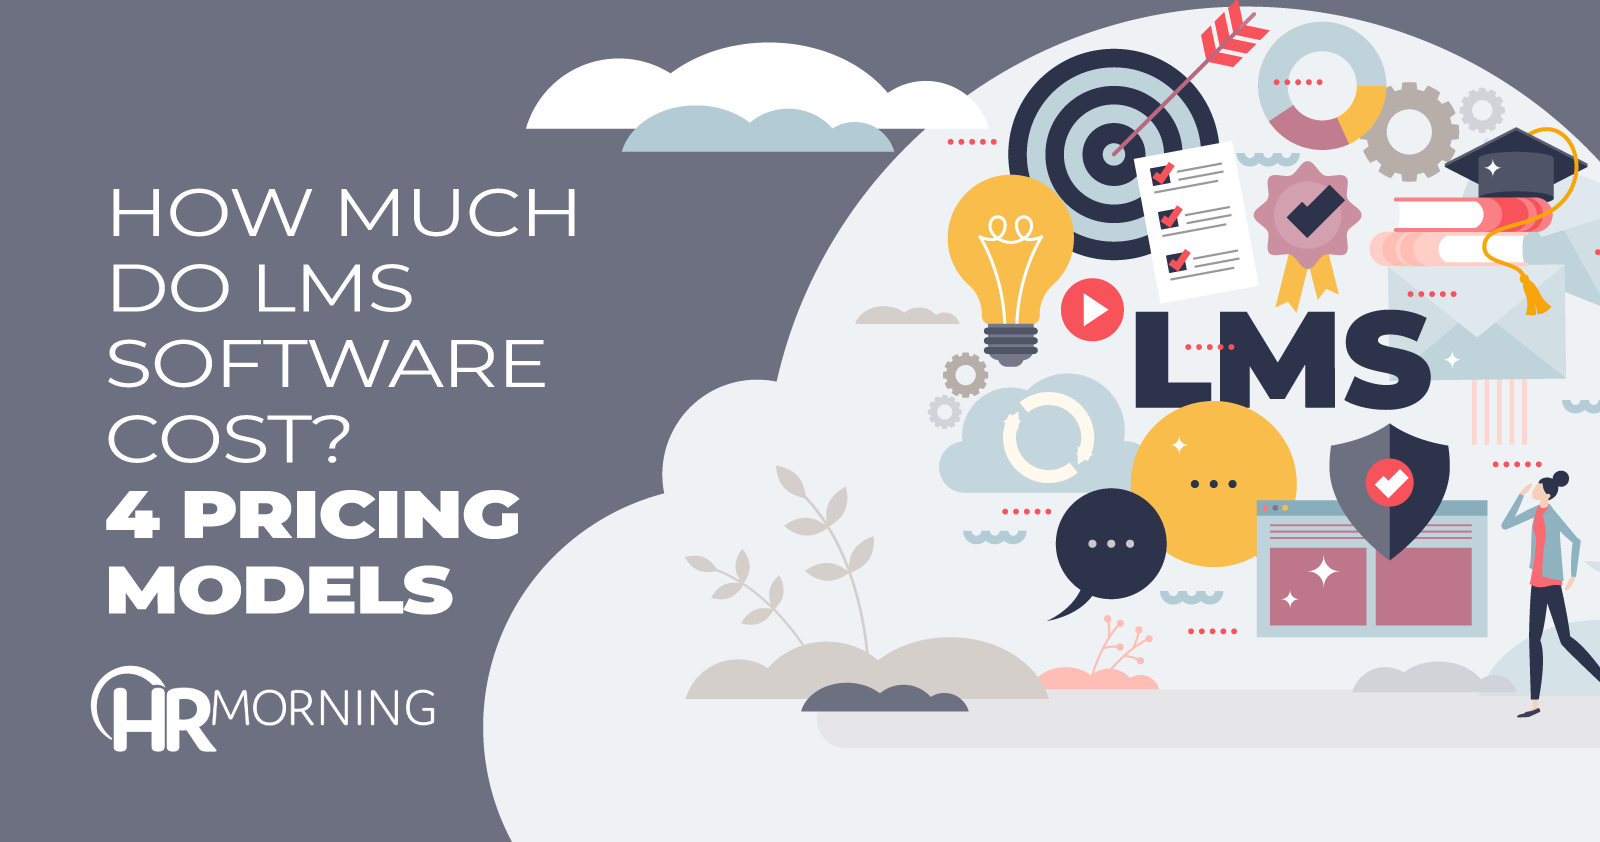 How much do LMS Software Cost? 4 Pricing Models